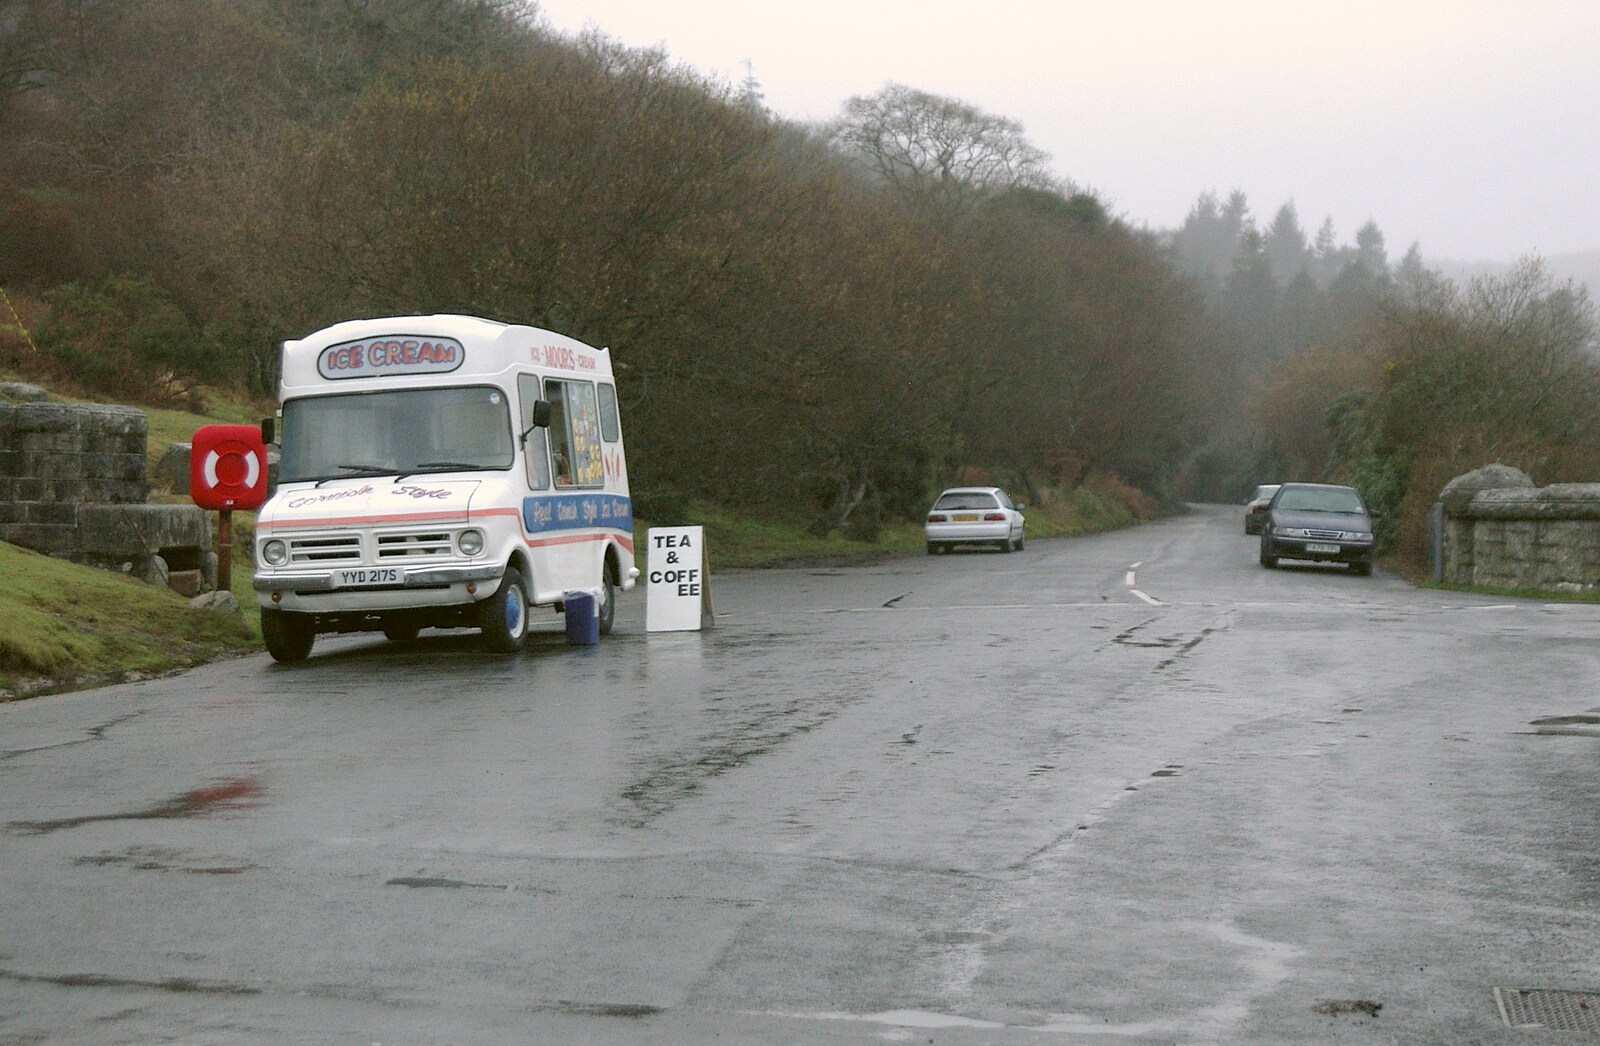 The optimistic ice-cream van braves the weather from A Wander Around Hoo Meavy and Burrator, Dartmoor, Devon - 18th December 2005